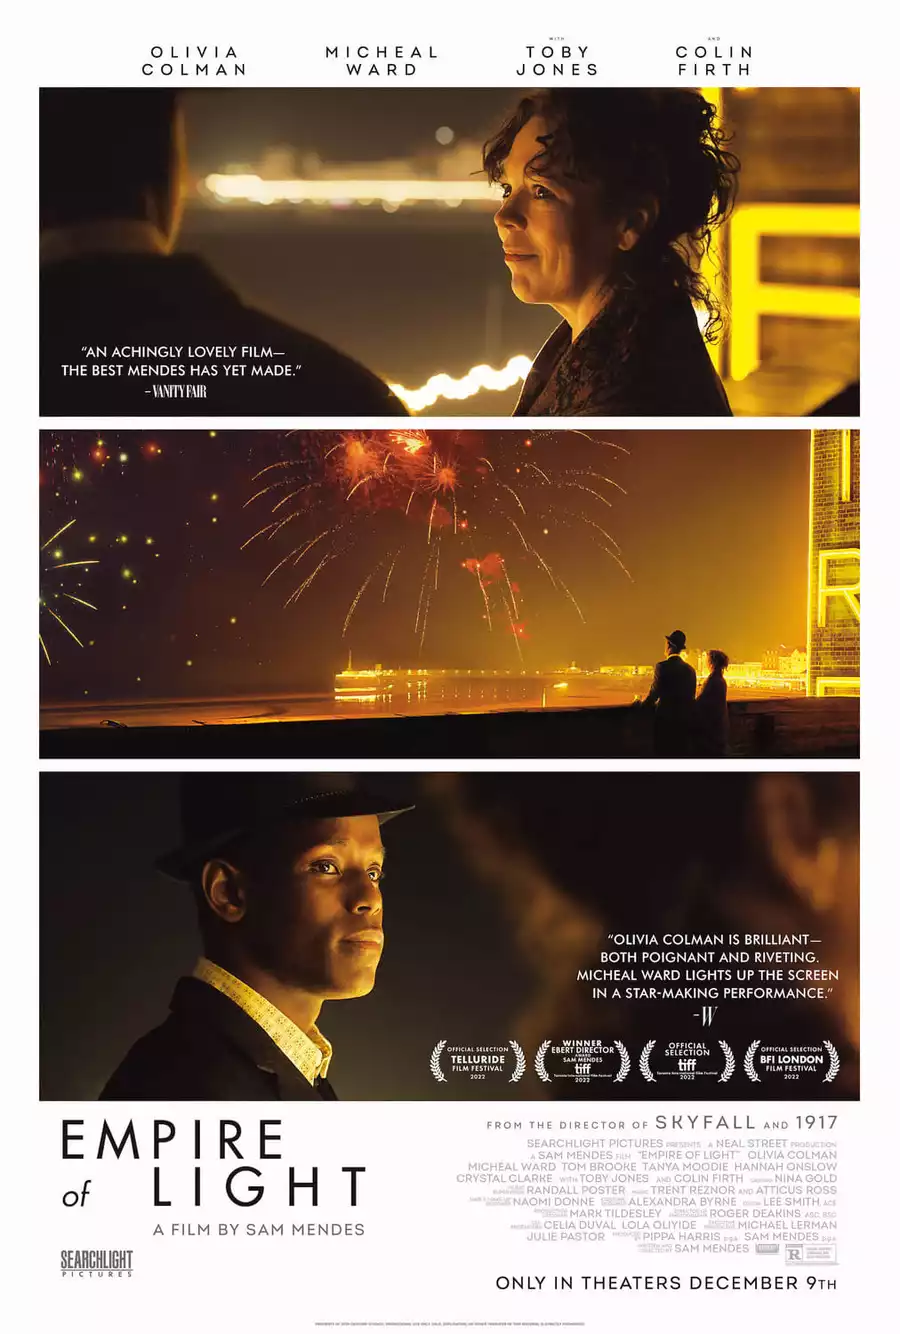 Poster for Sam Mendes' drama «Empire of Light», starring Olivia Colman, Micheal Ward, Colin Firth and Toby Jones.

The film is set in an English coastal town in the early 1980s. It is a powerful and painful story about the power of human connection in turbulent times and the magic of cinema.